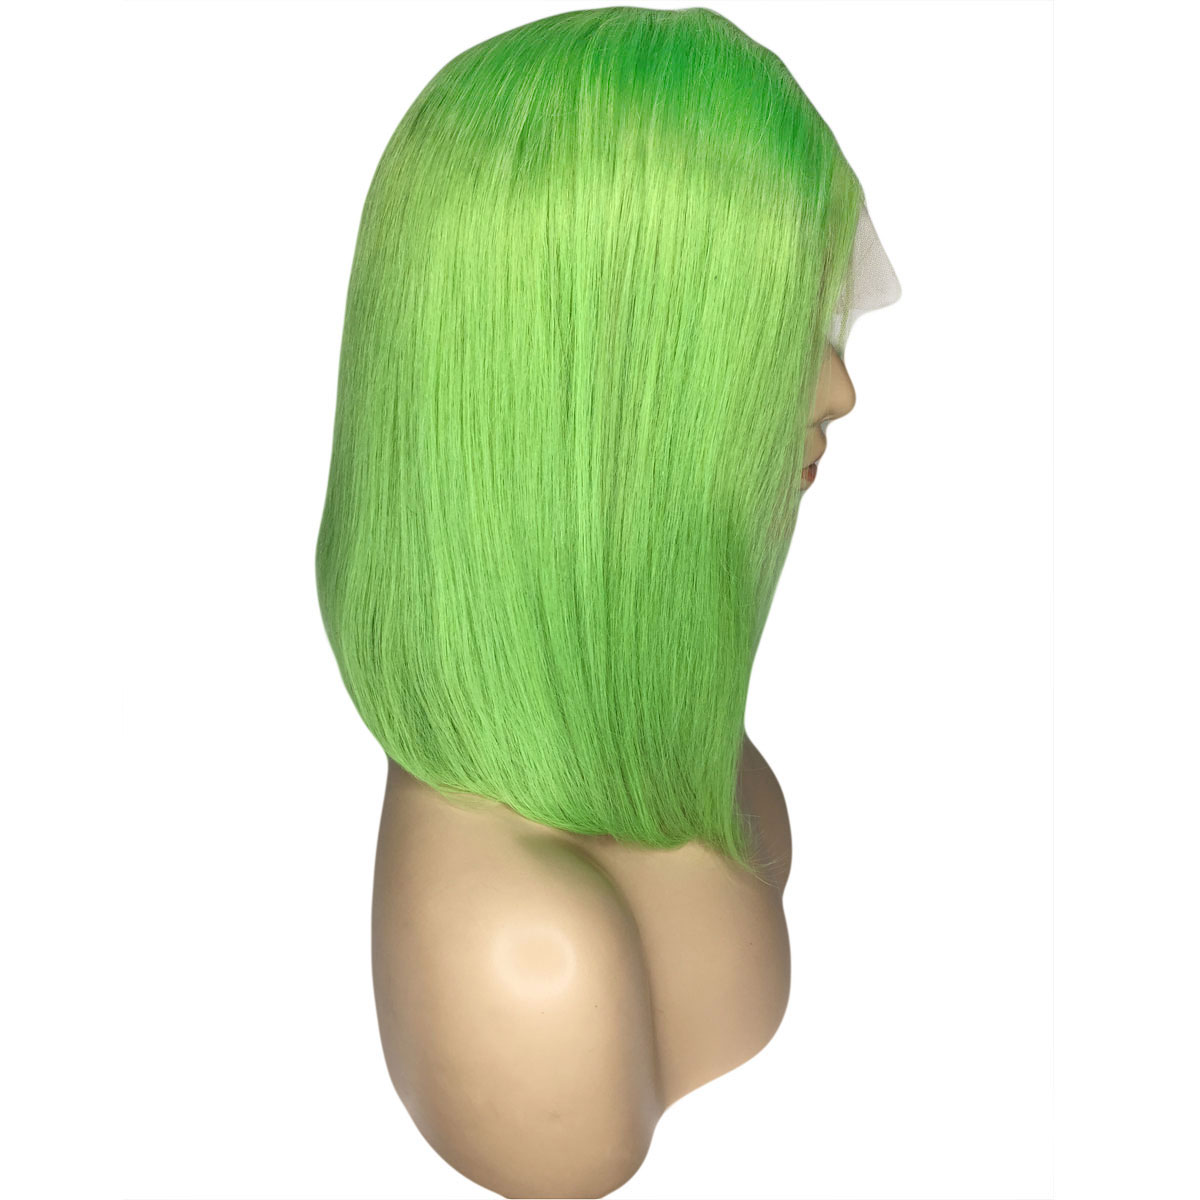 Lace Front Cap Straight Women Human Hair 130% 10 Inches Wigs